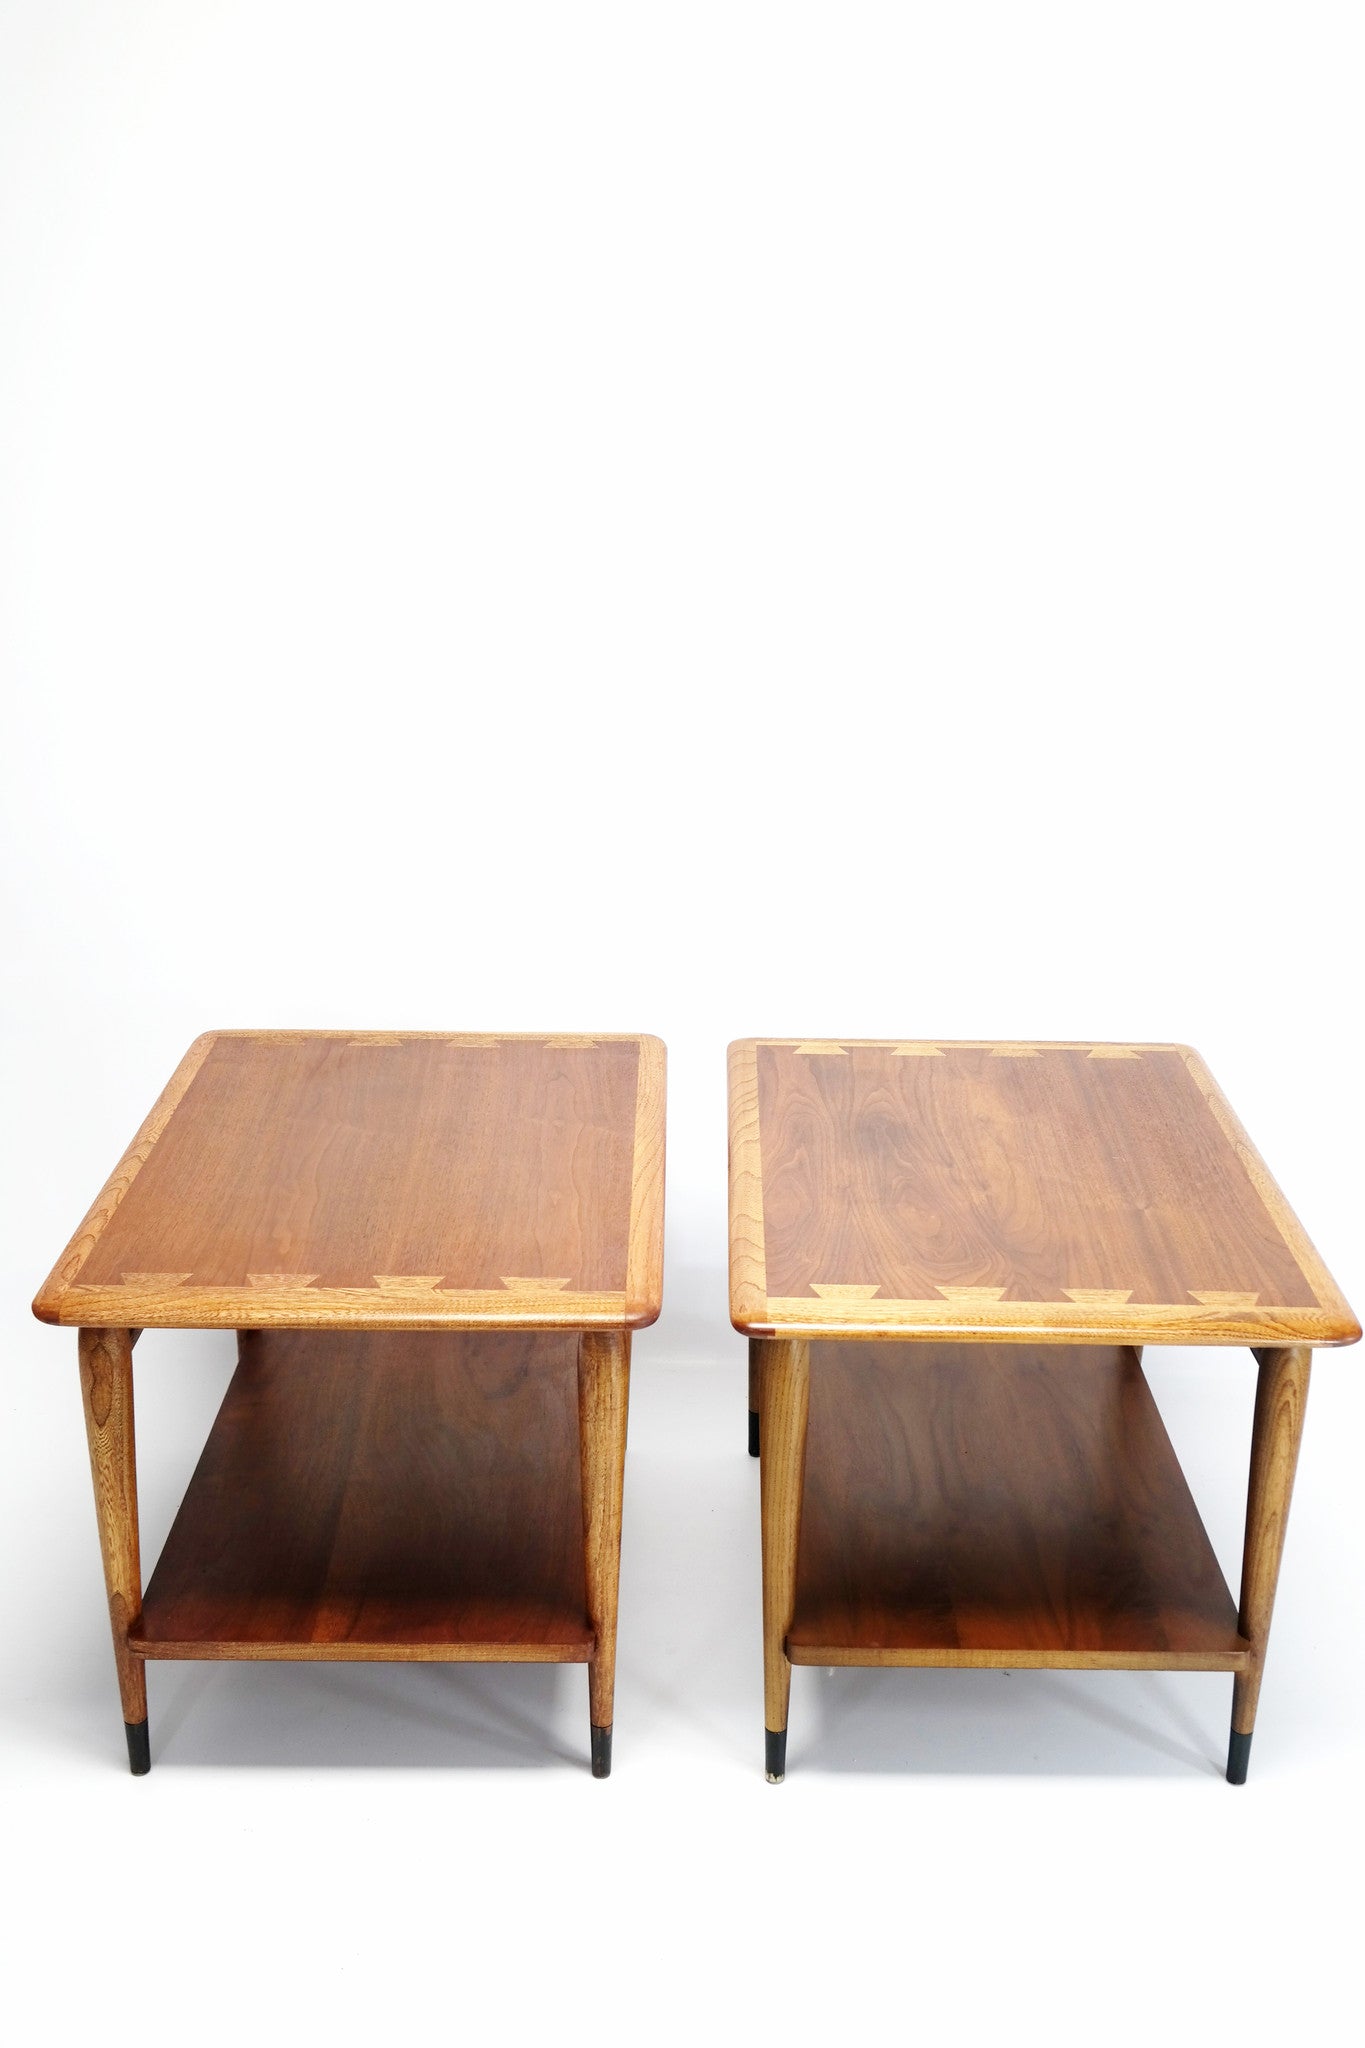 SOLD | 60's Lane Acclaim Side Table Pair The Vintedge Co.